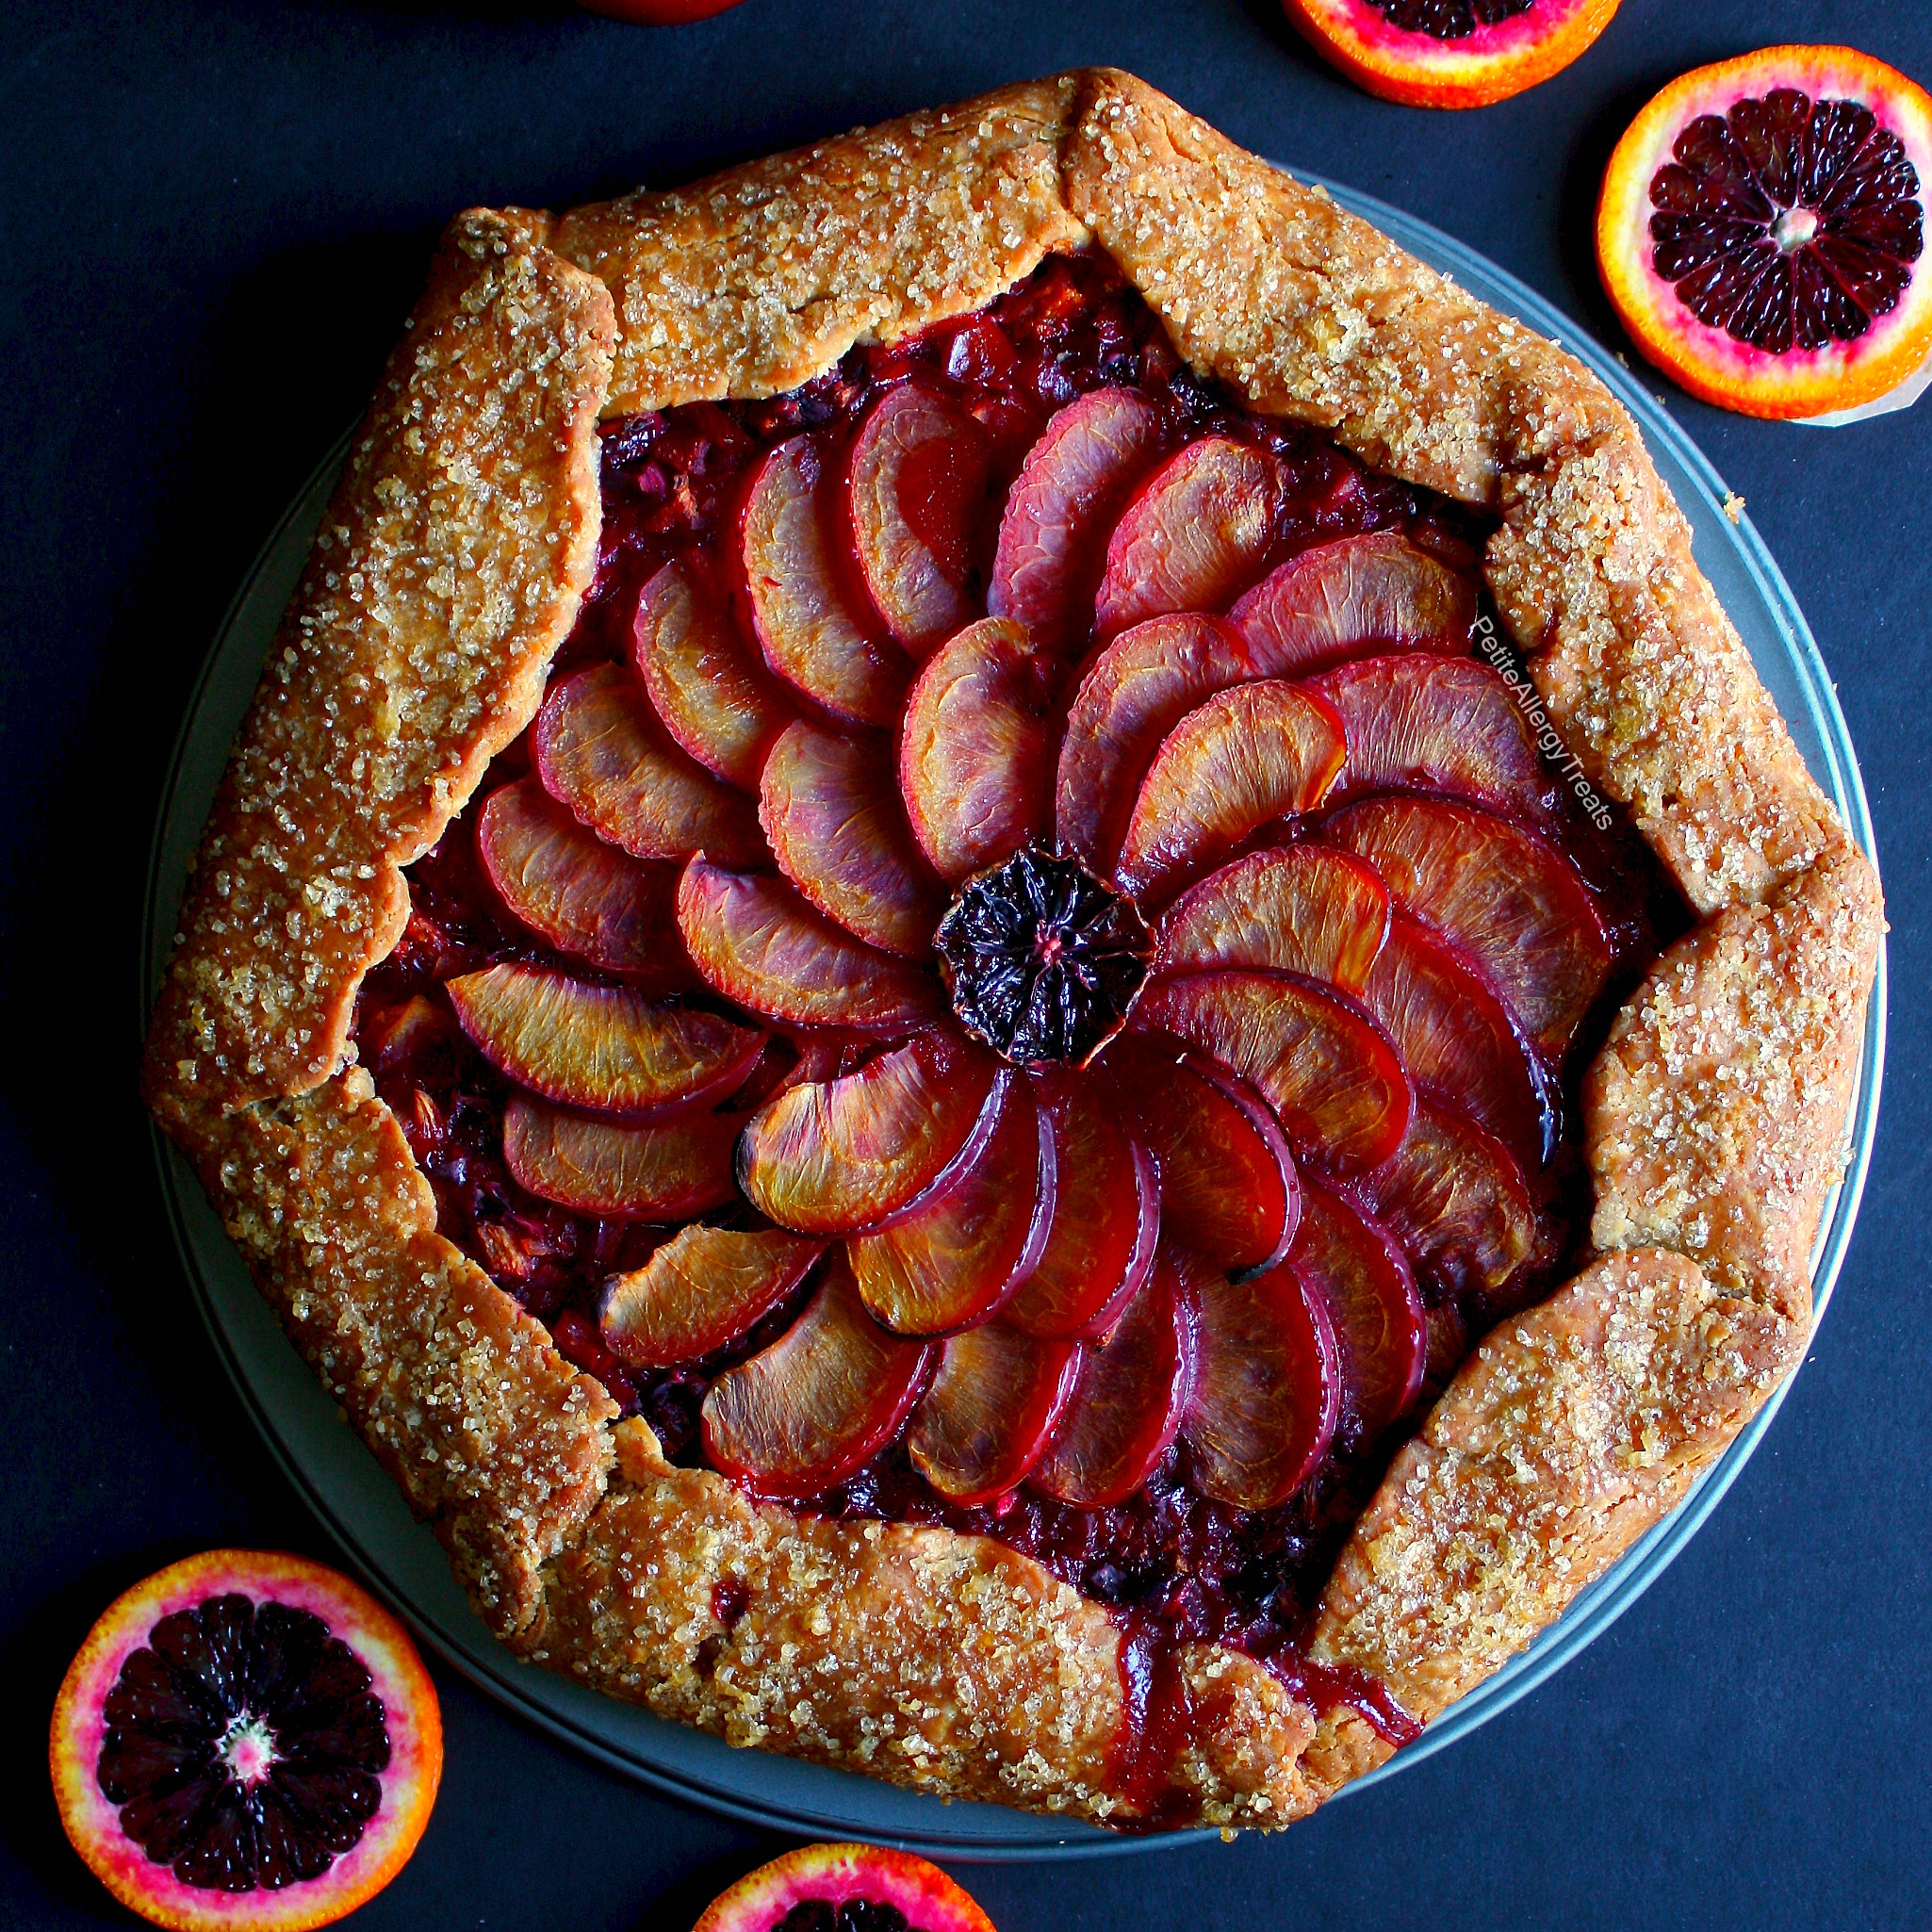 Gluten Free Plum Pie Recipe (vegan dairy free)- Easy rustic galette filled with sweet plums and tart blood oranges